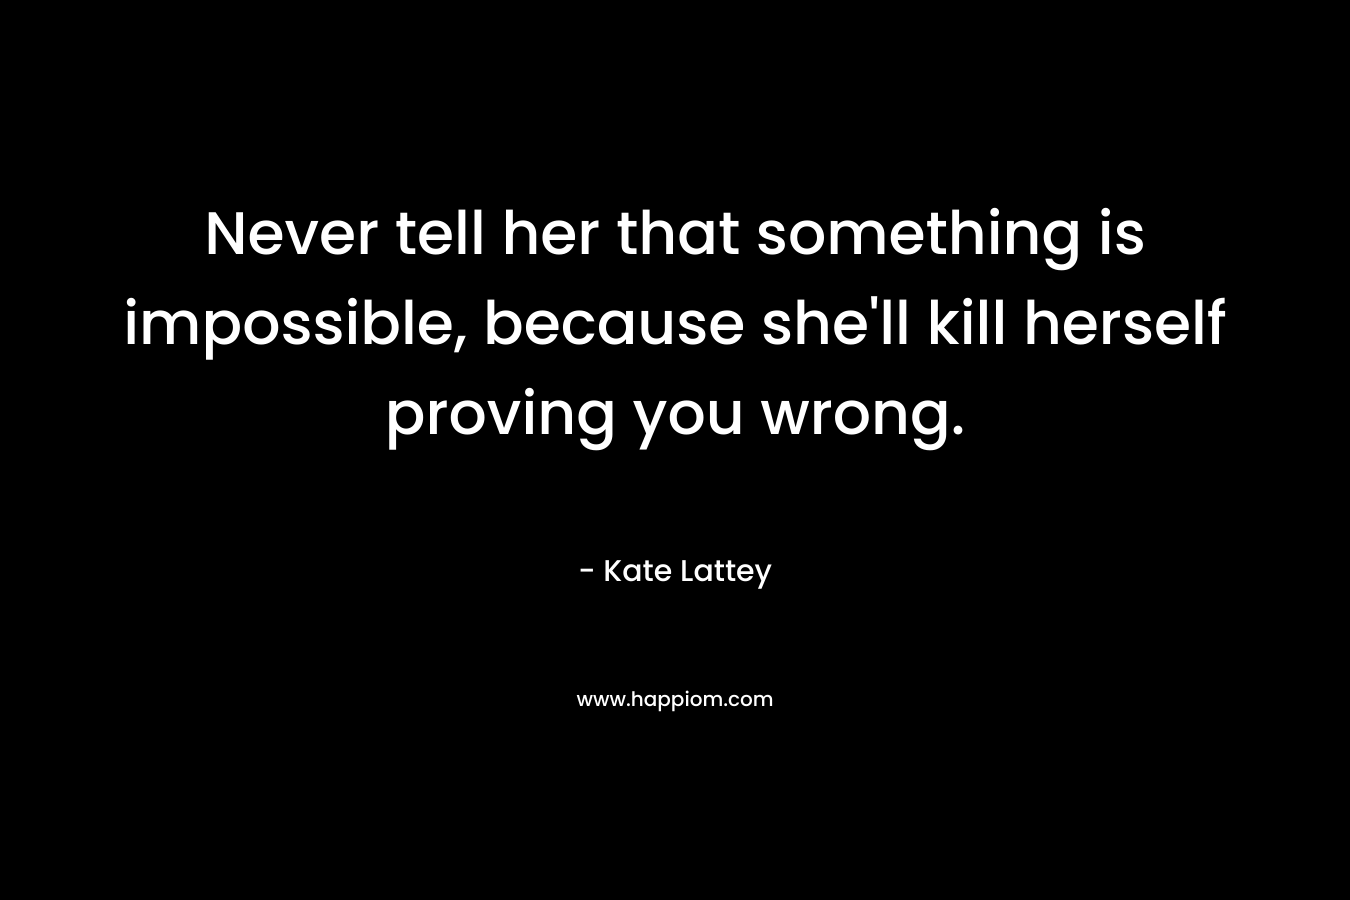 Never tell her that something is impossible, because she’ll kill herself proving you wrong. – Kate Lattey